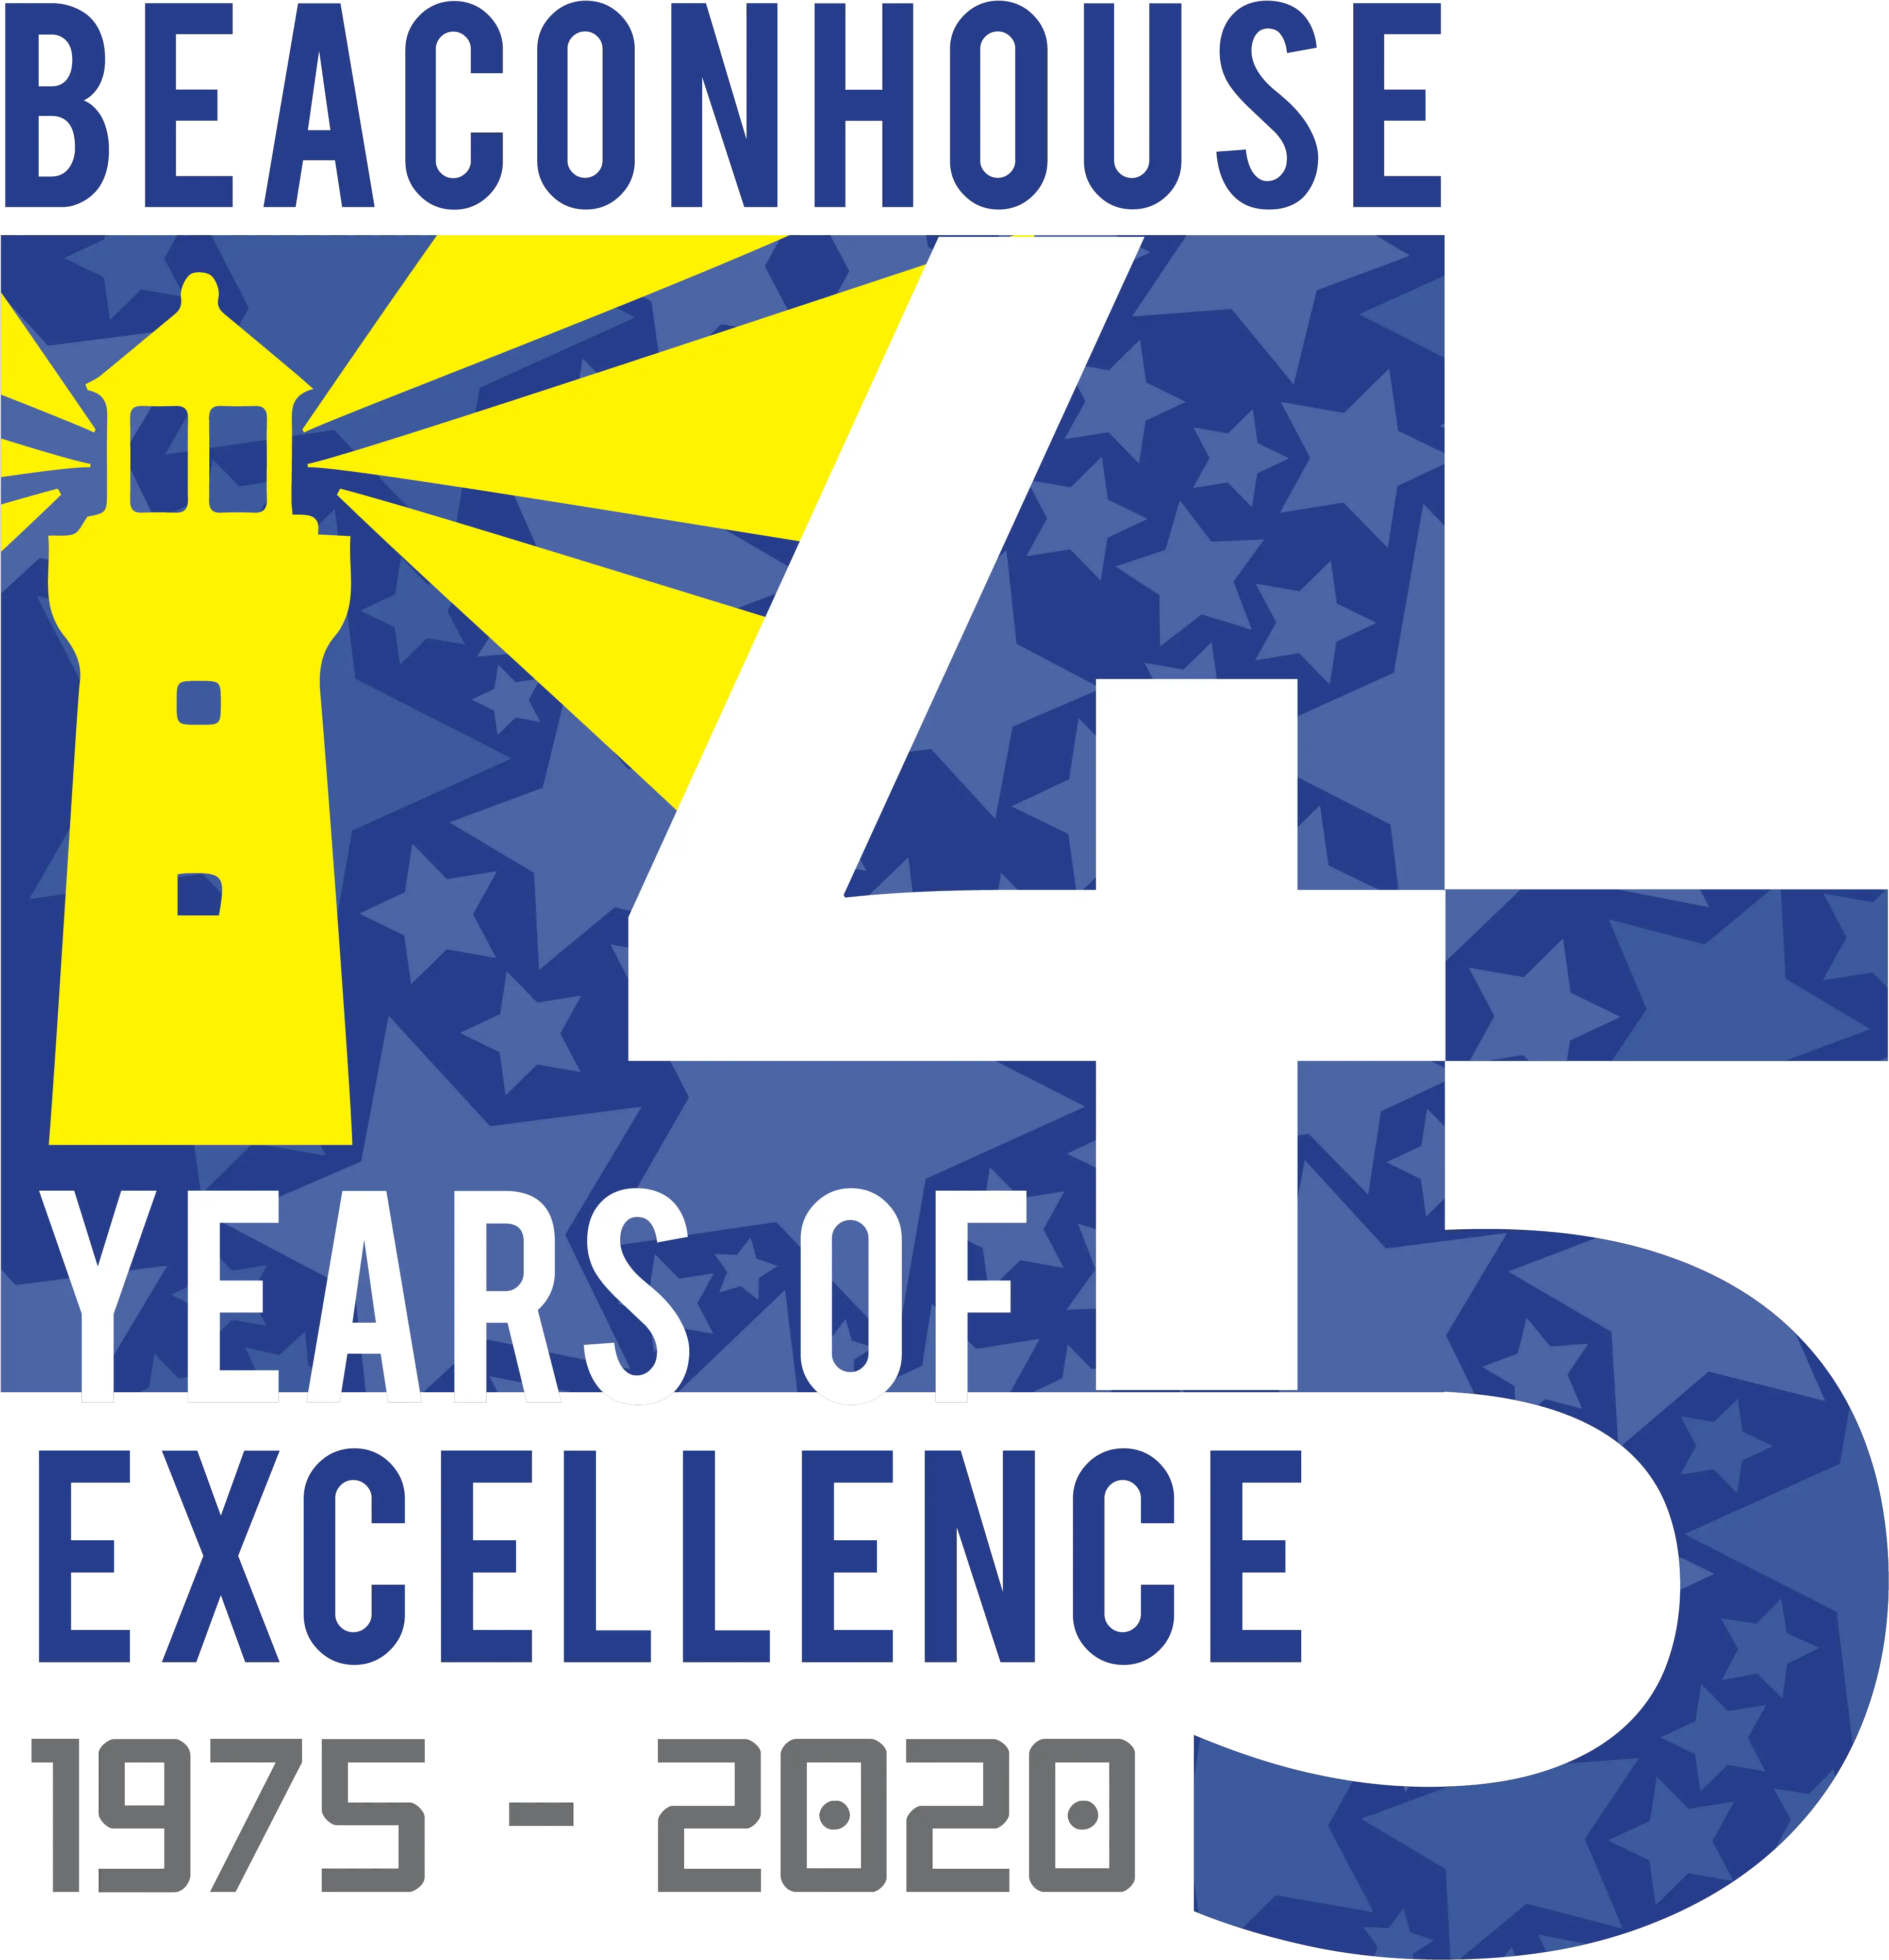 The Beaconhouse Times Online Employee Excellence Award Png Osaid Logo